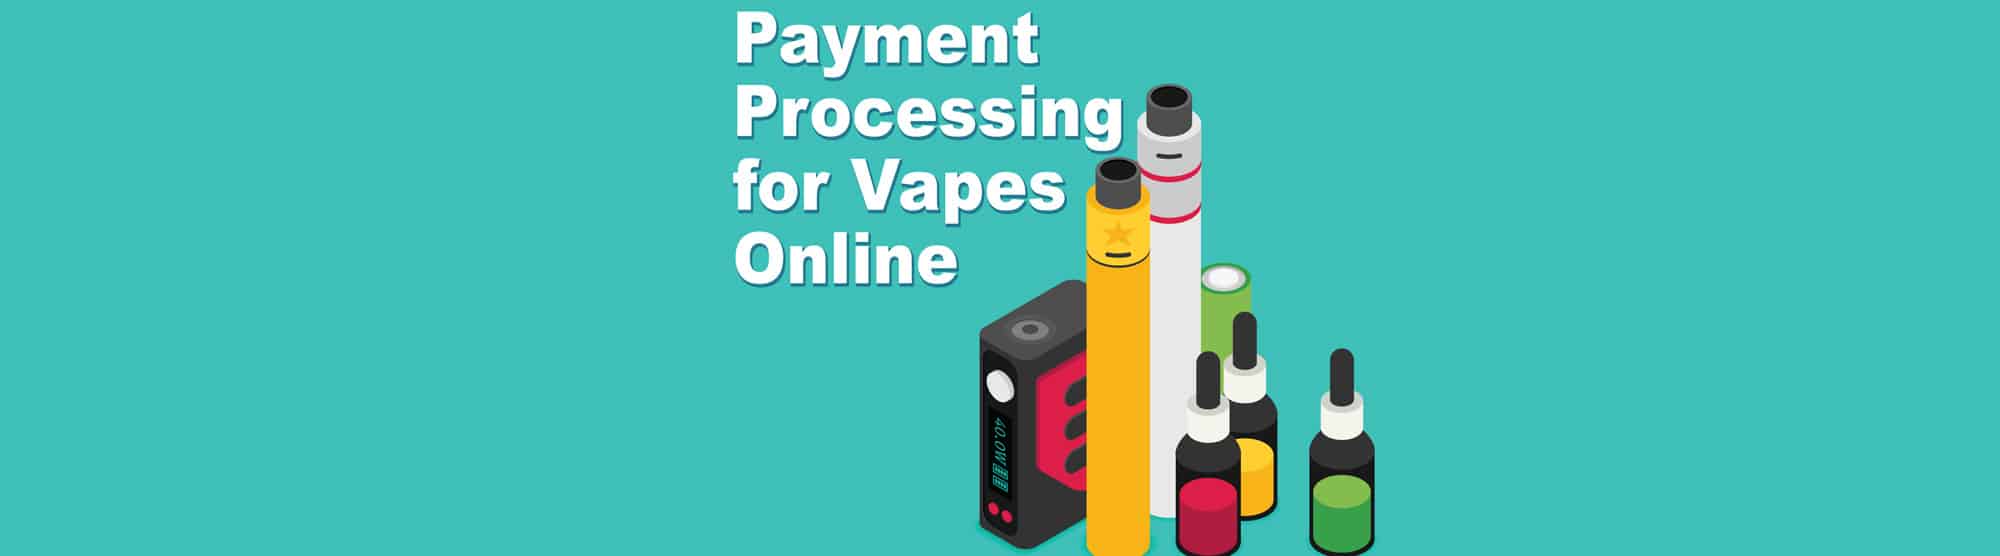 How to get payment processing for vape products online